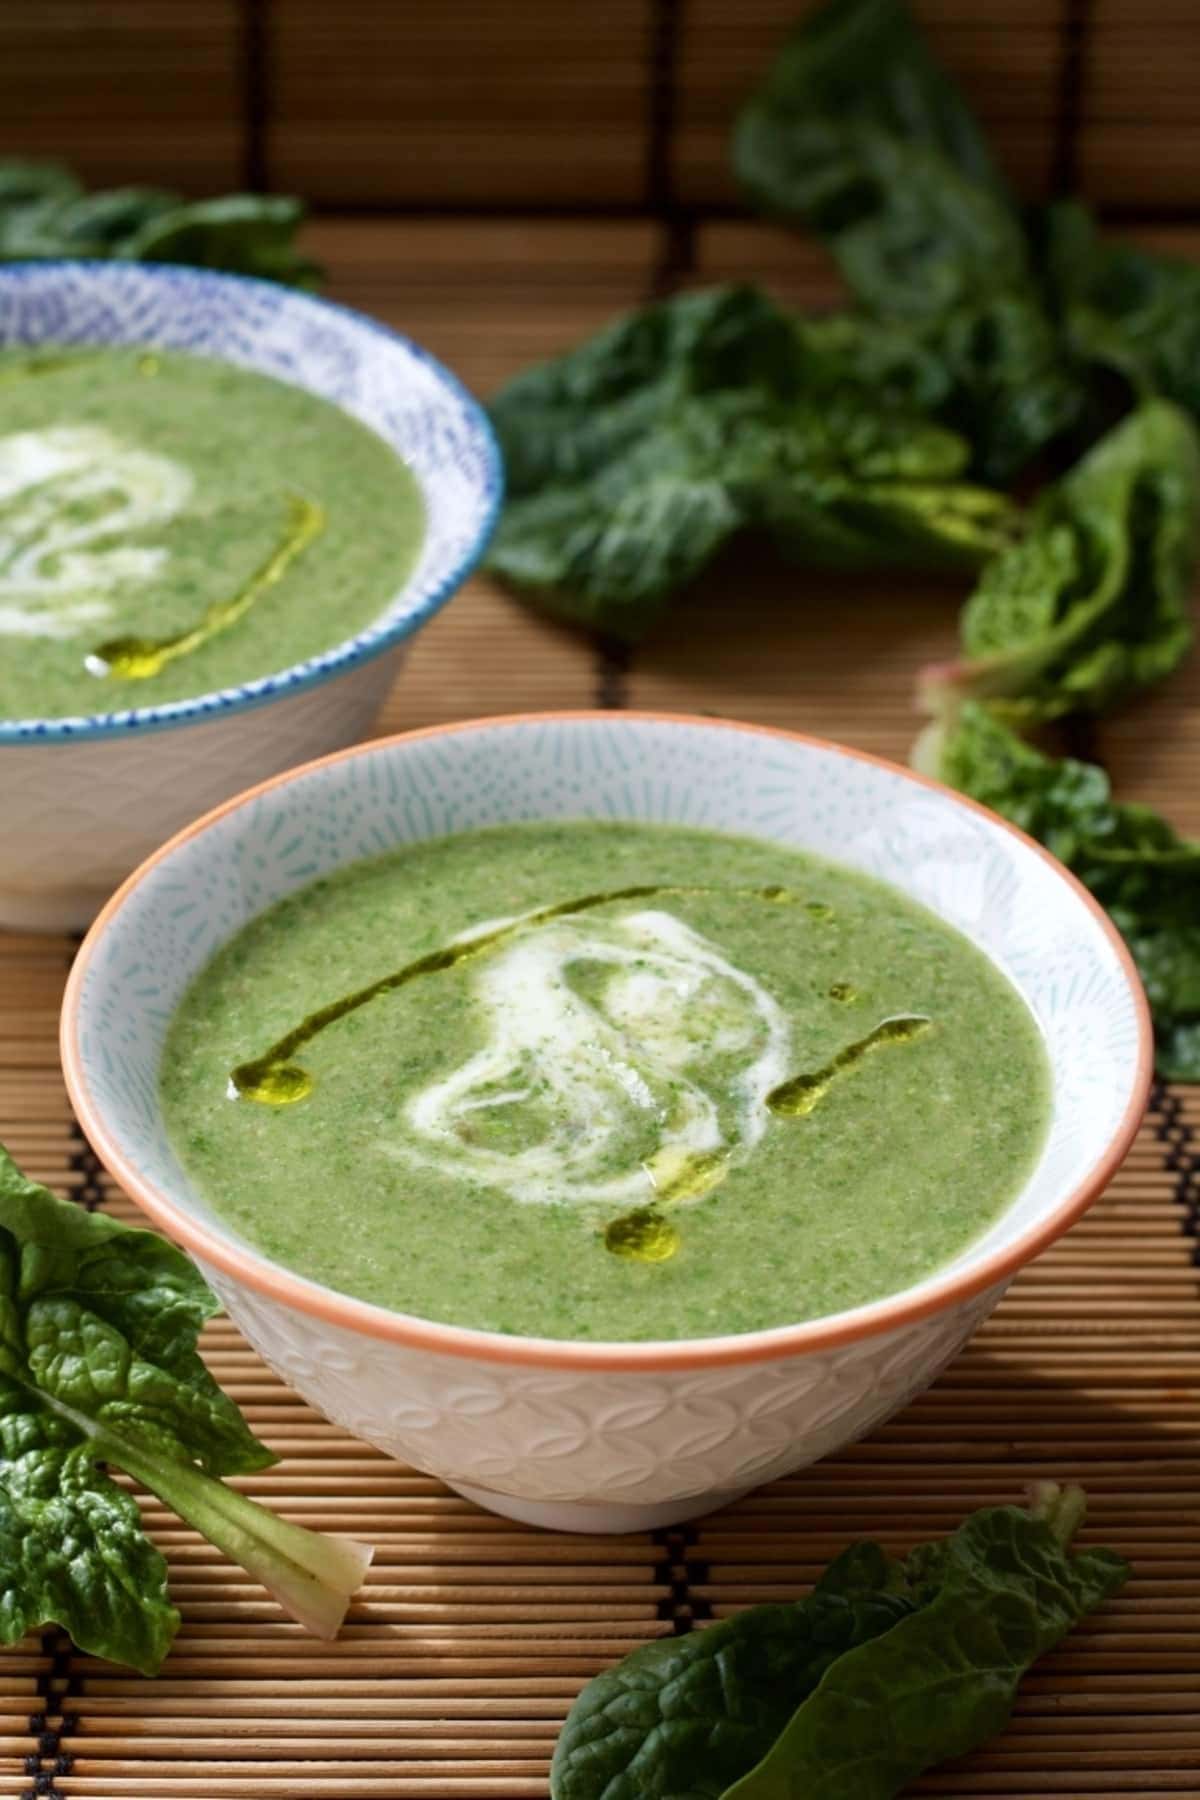 Small bowl of green soup with spinach leaves around.